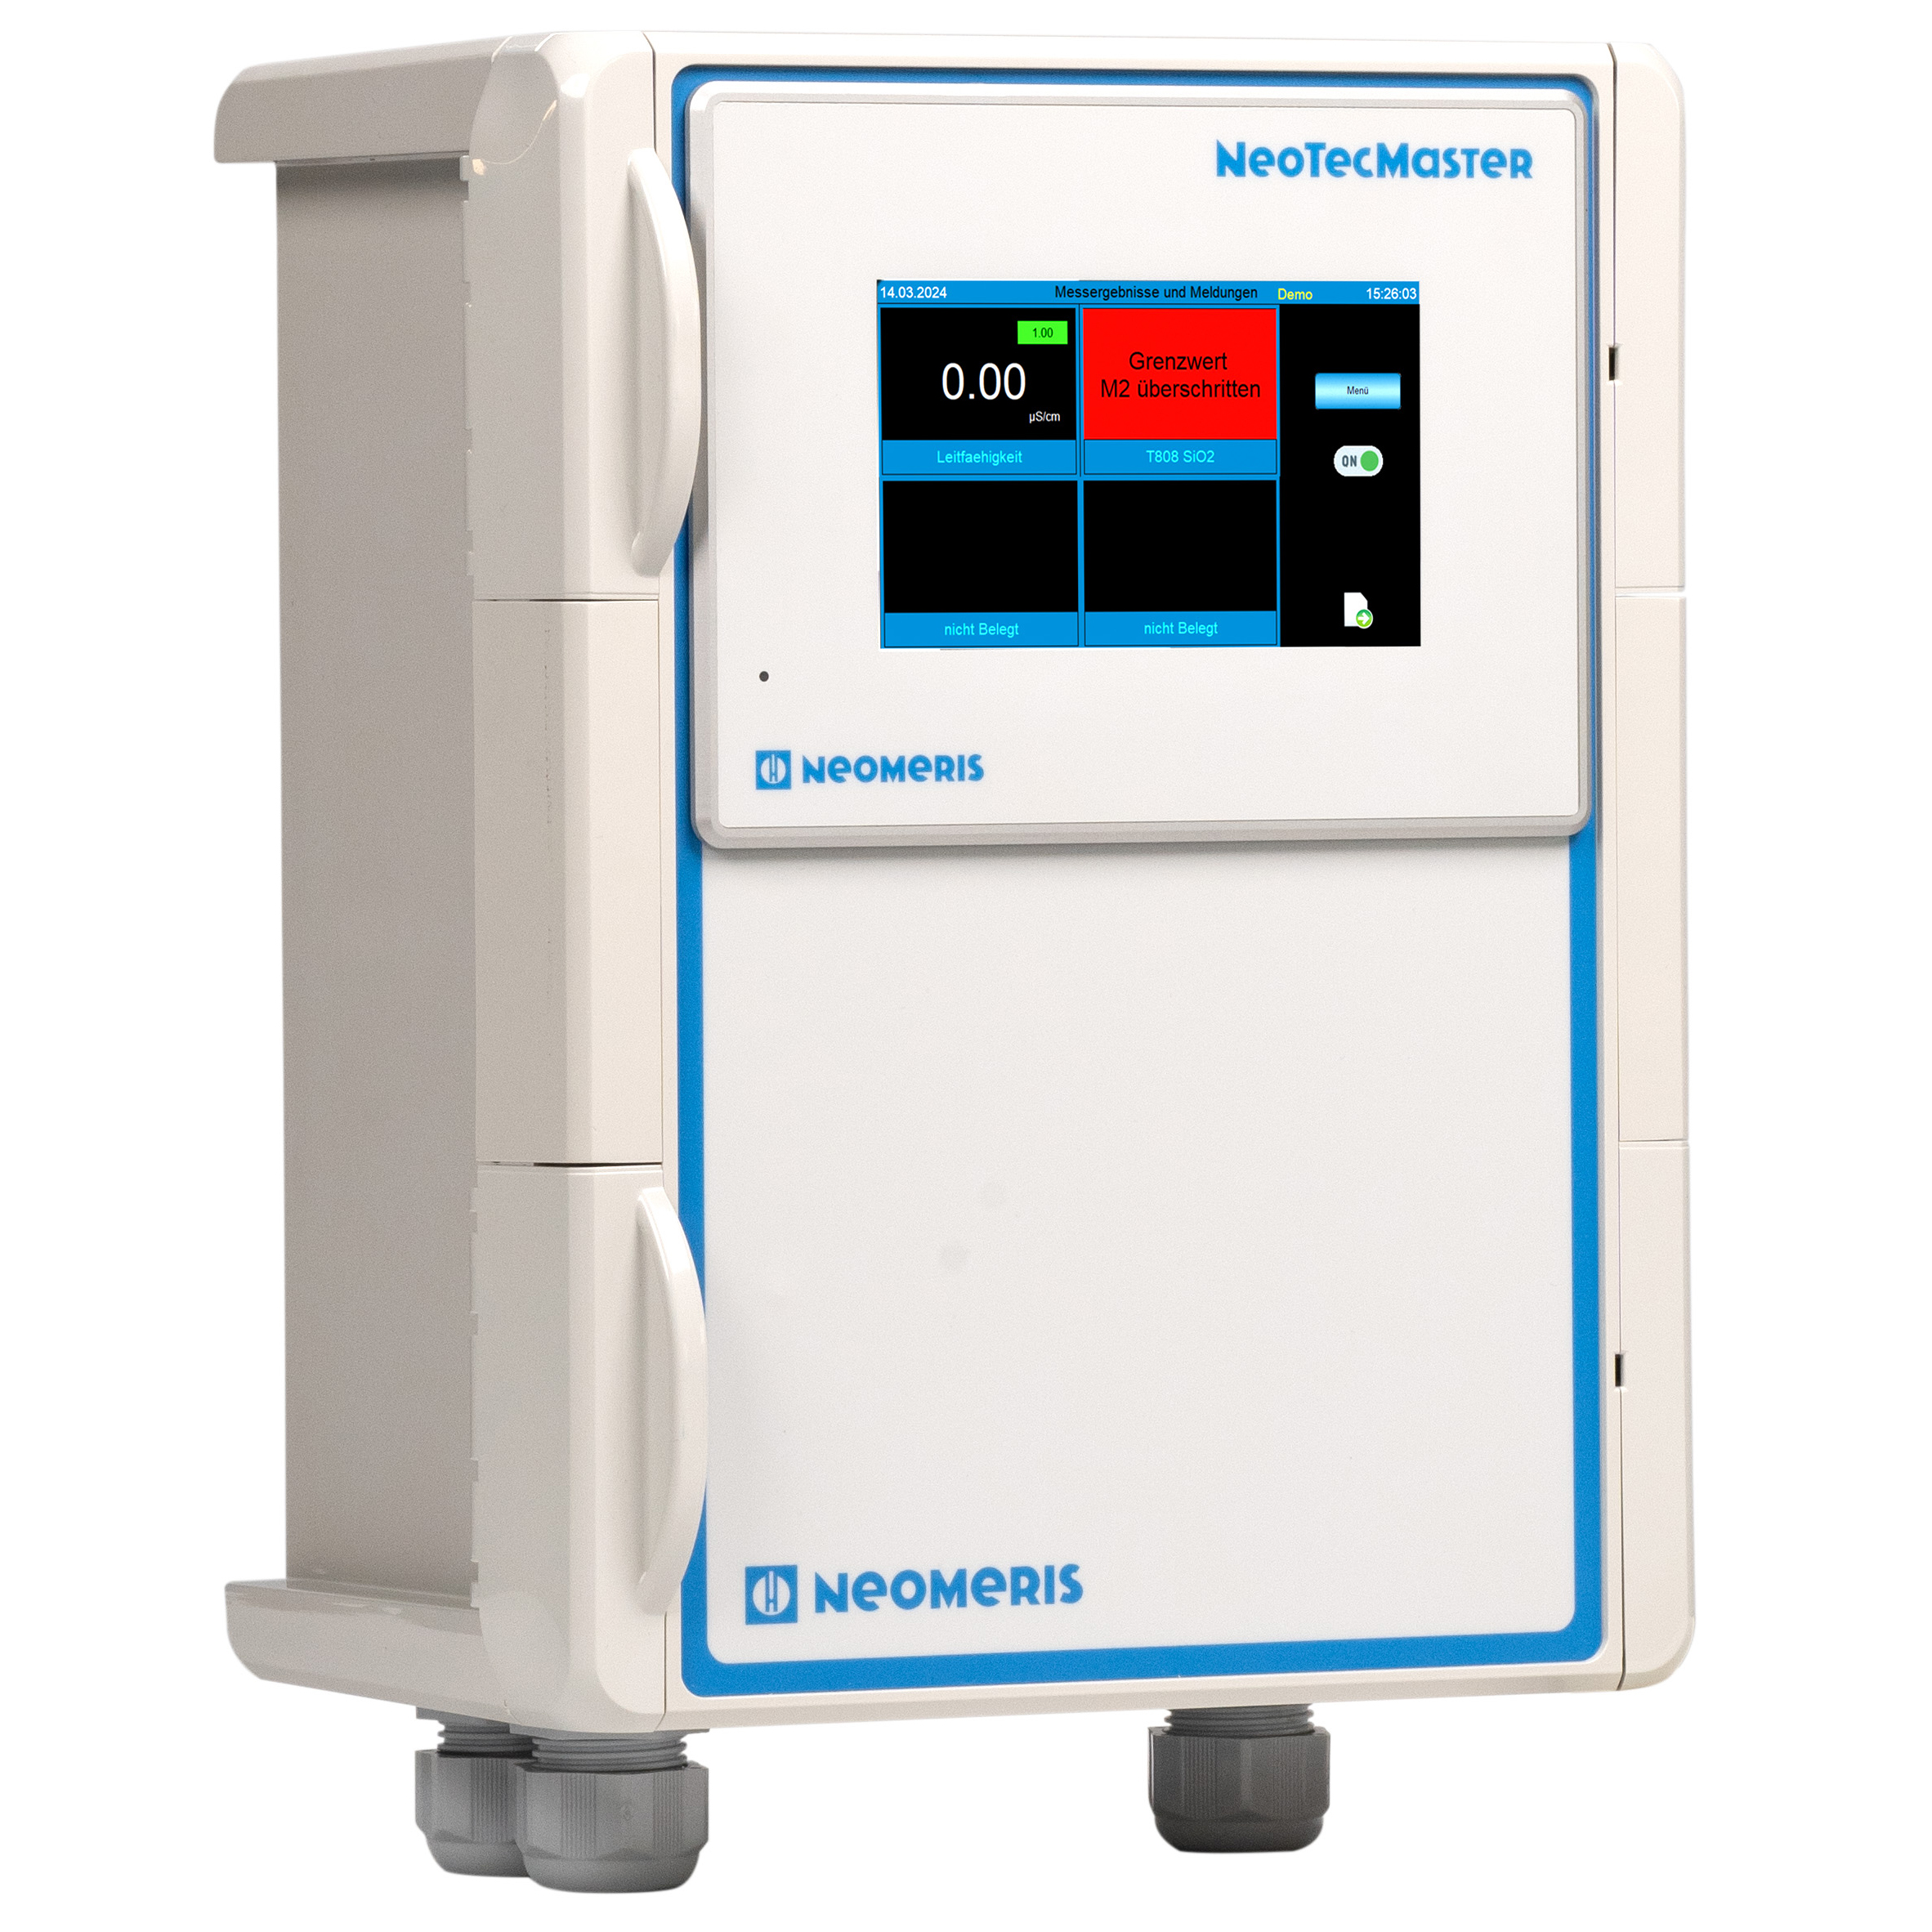 NeoTecMaster® - 5 inch in IP 66 housing as a 4-channel system, preconfigured to accept up to 8 incoming 4-20 mA signals, one R232 signal and Modbus signal, can be optionally enabled for 8 channels